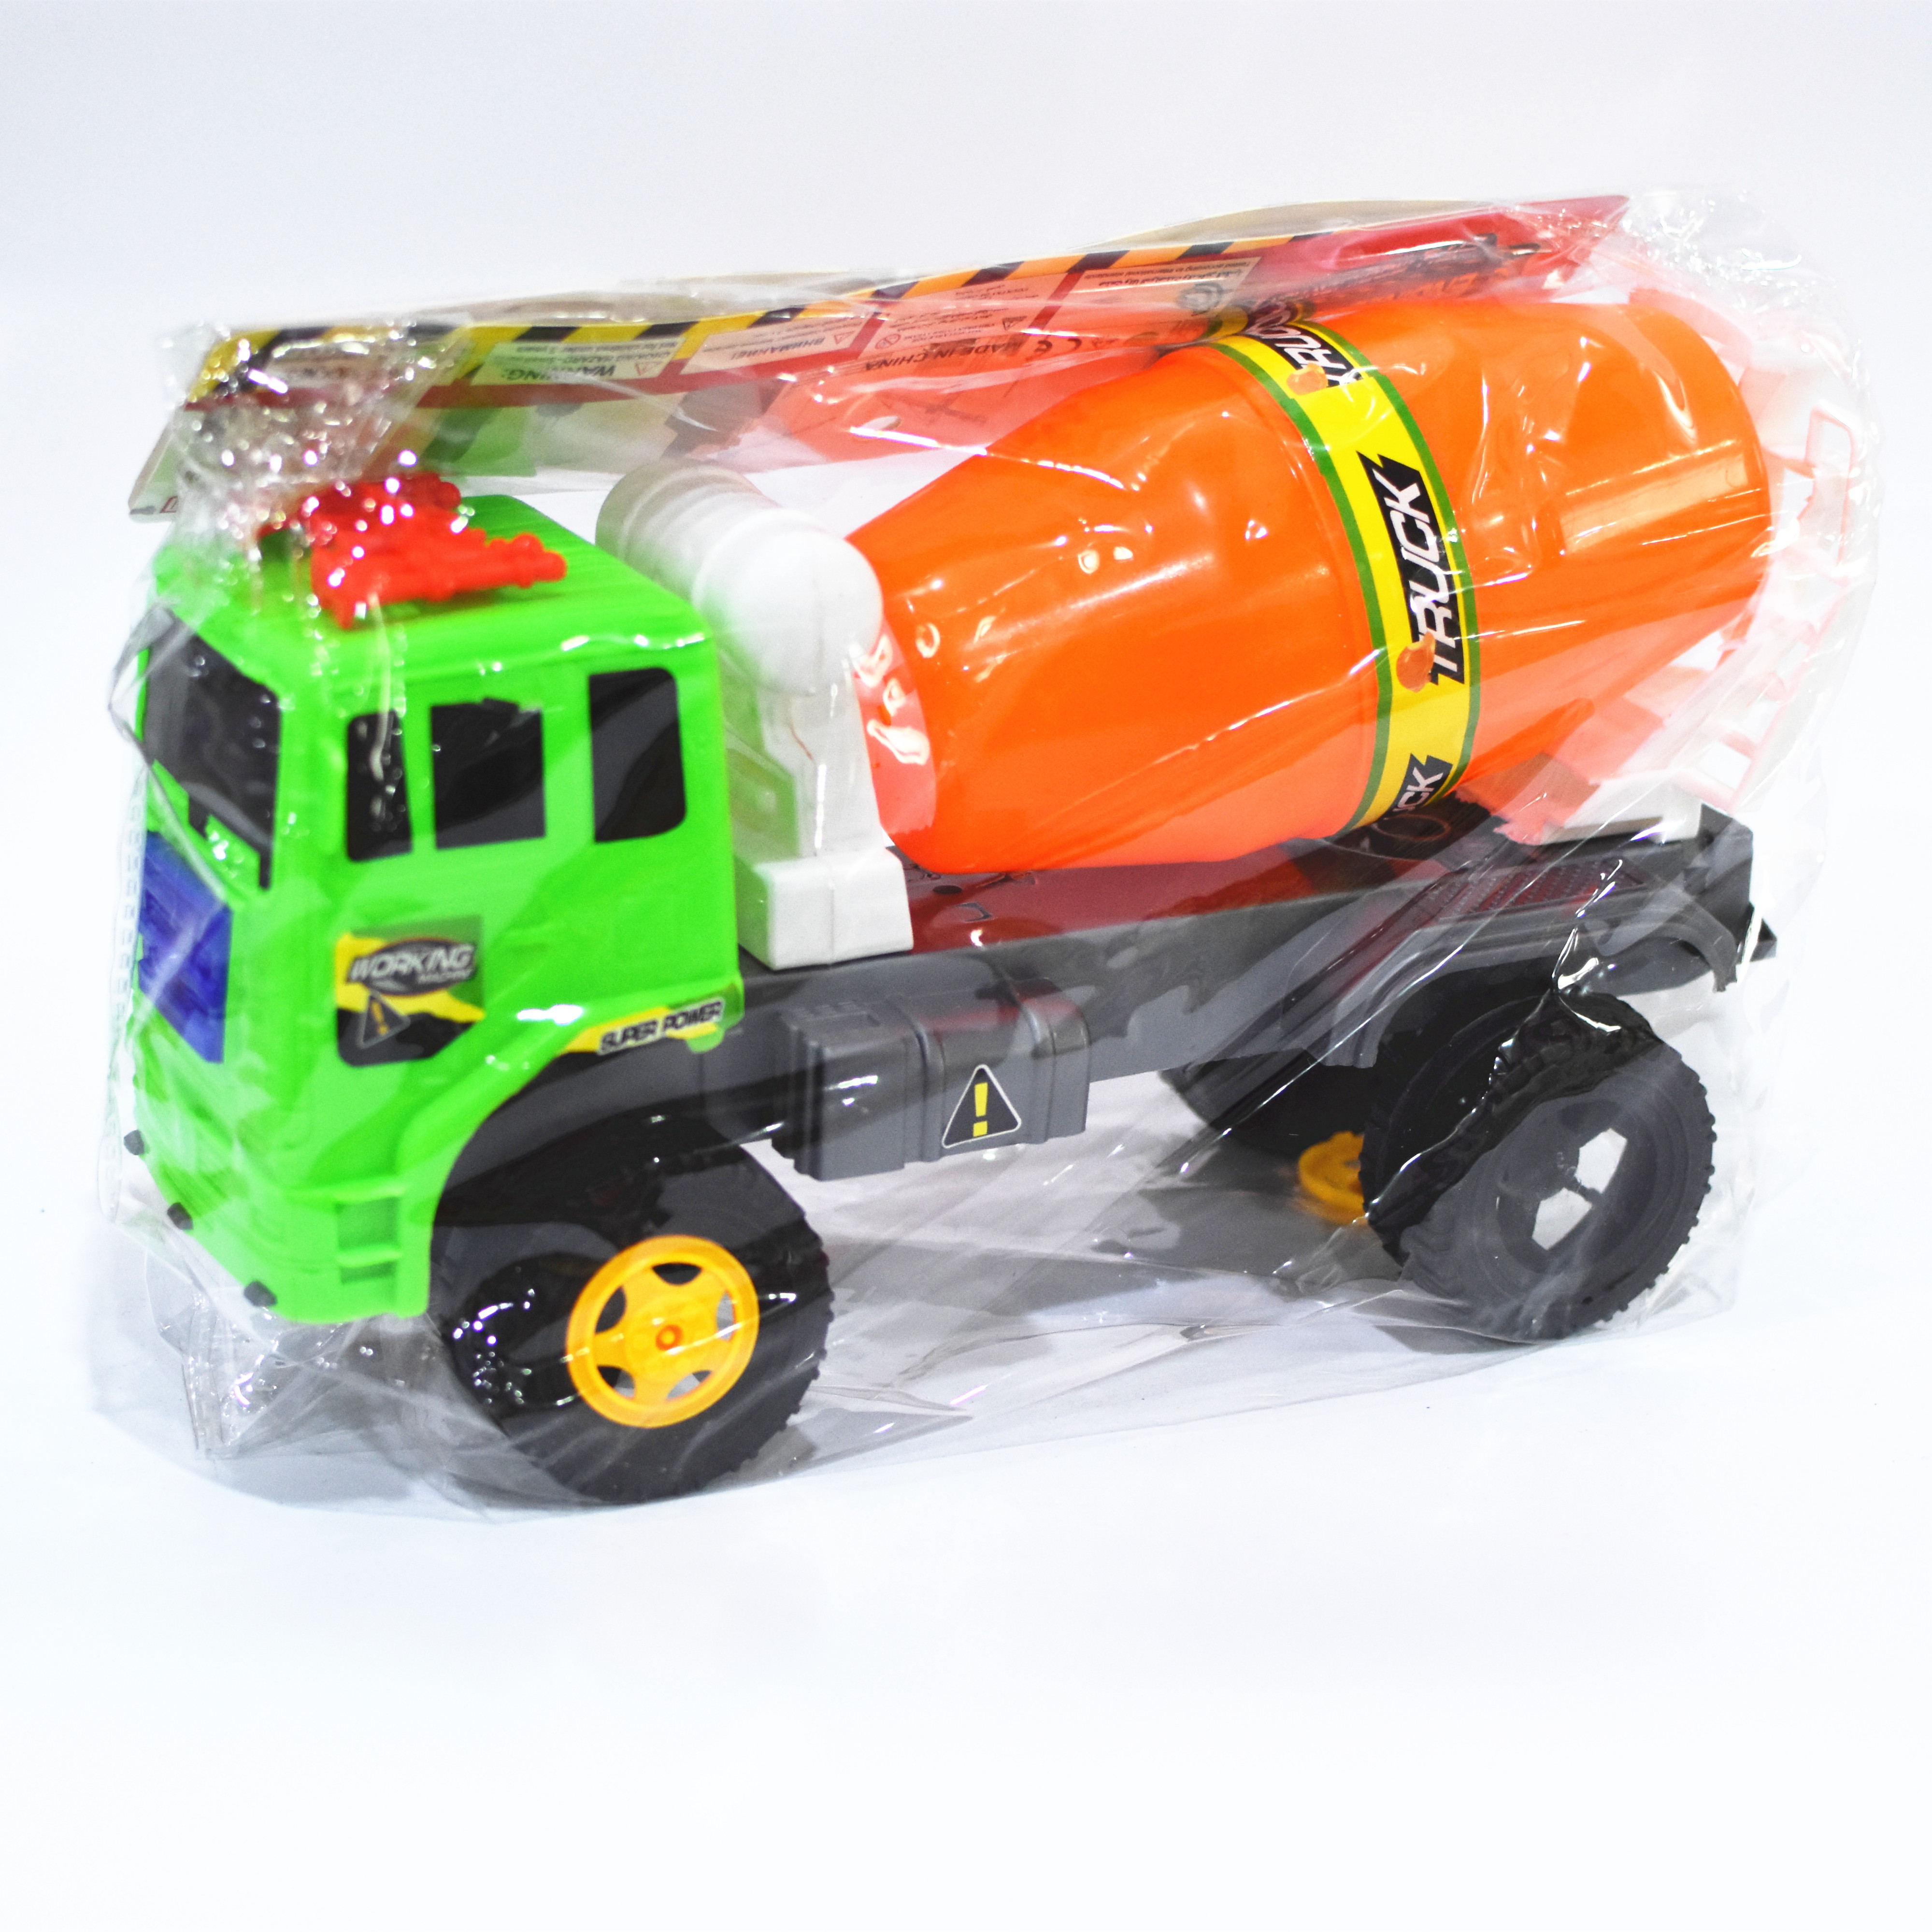 FREE WHEEL TRUCK TOY LY1822